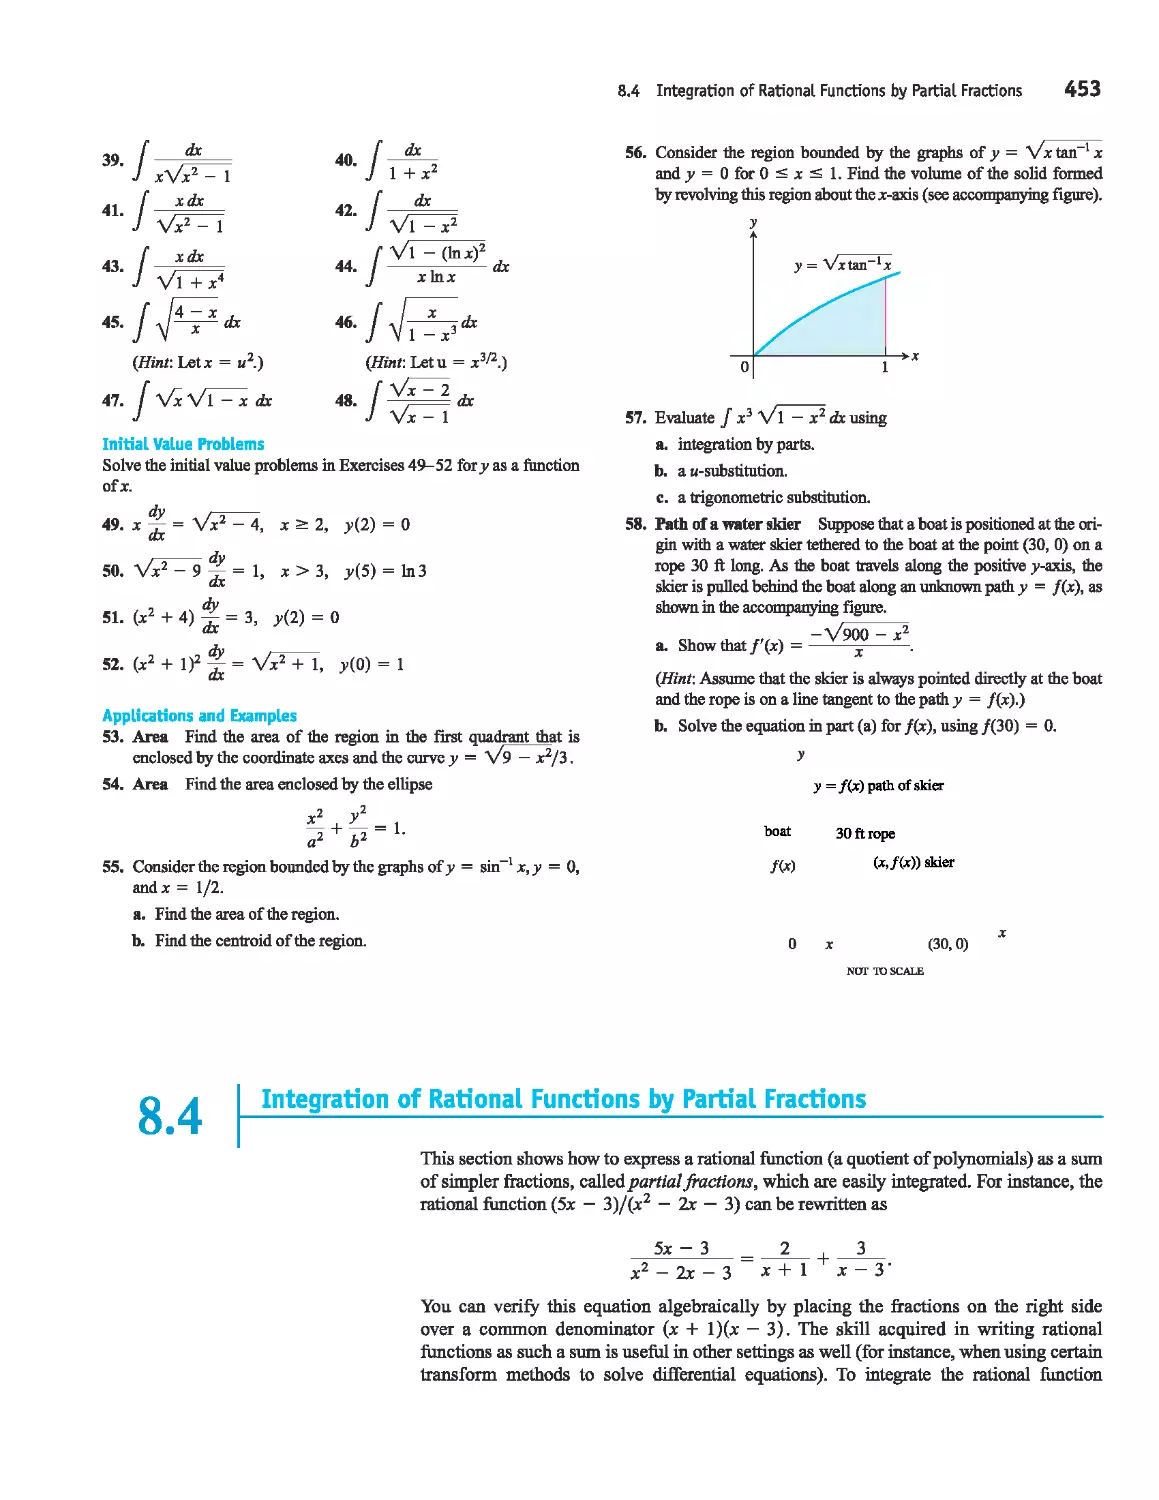 8.4 - 
Integration of Rational Functions by Partial Fractions